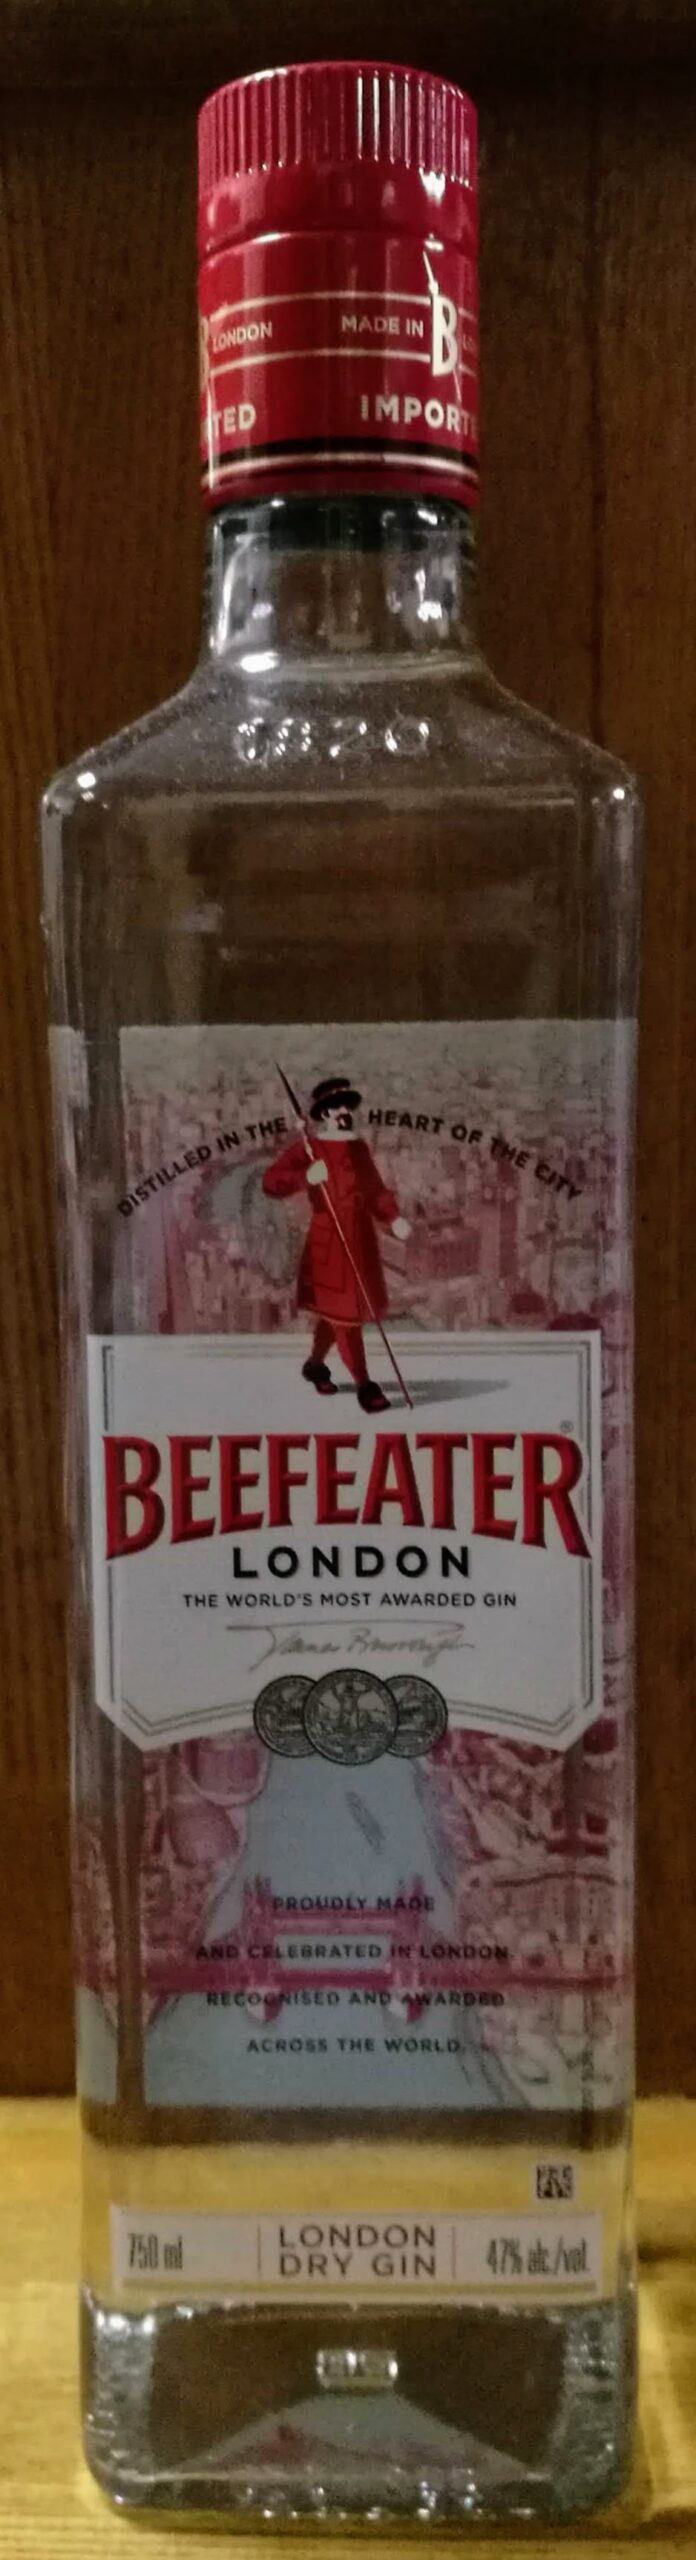 Beefeater ビーフィーター